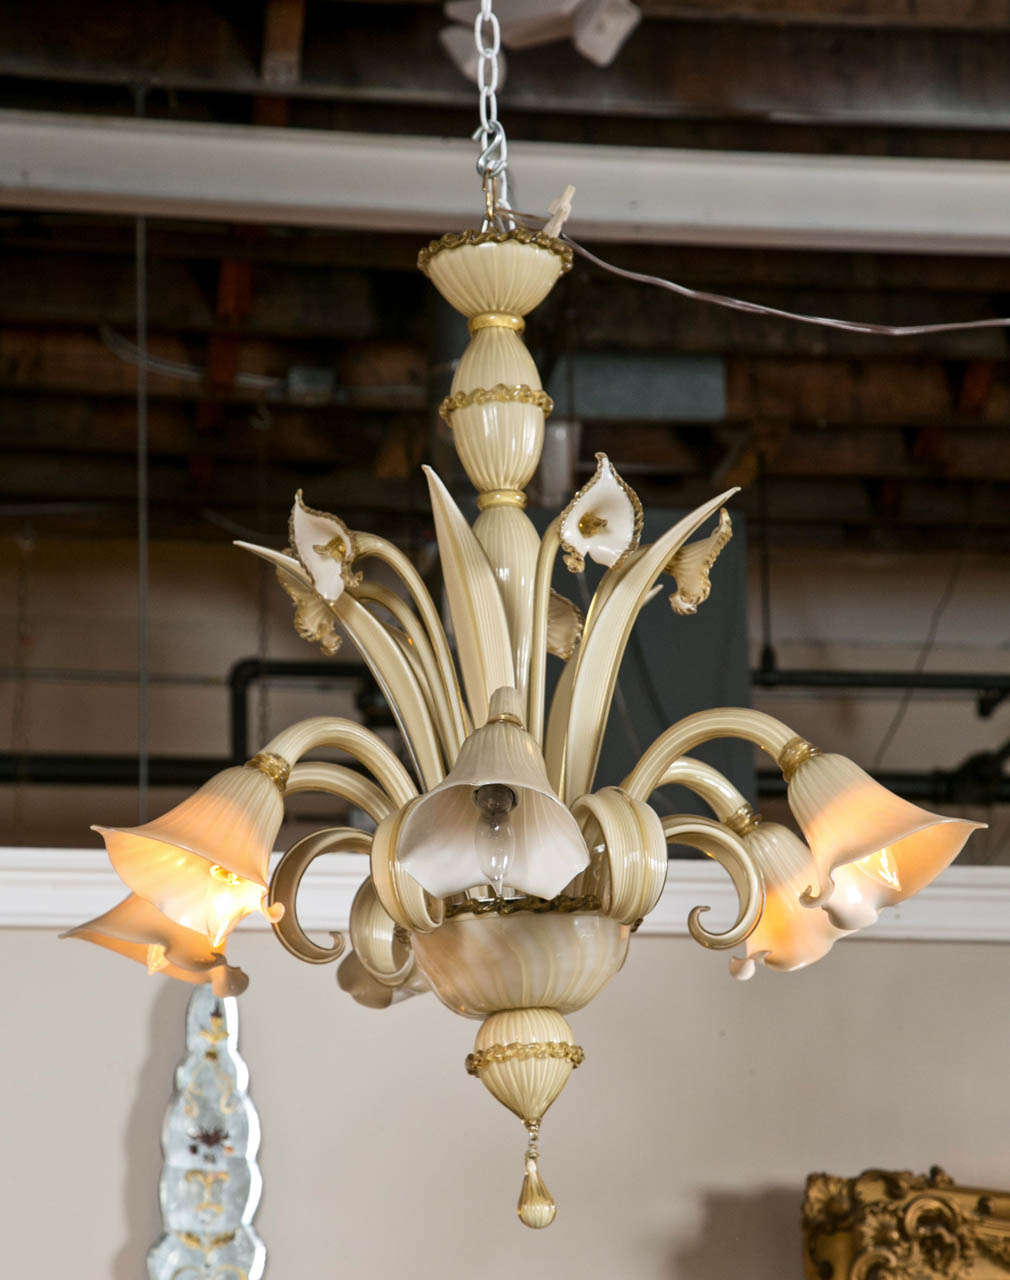 A beautiful Italian Murano six-light chandelier, in gorgeous beige and gold handblown glass, some glass parts having gold aventurine.